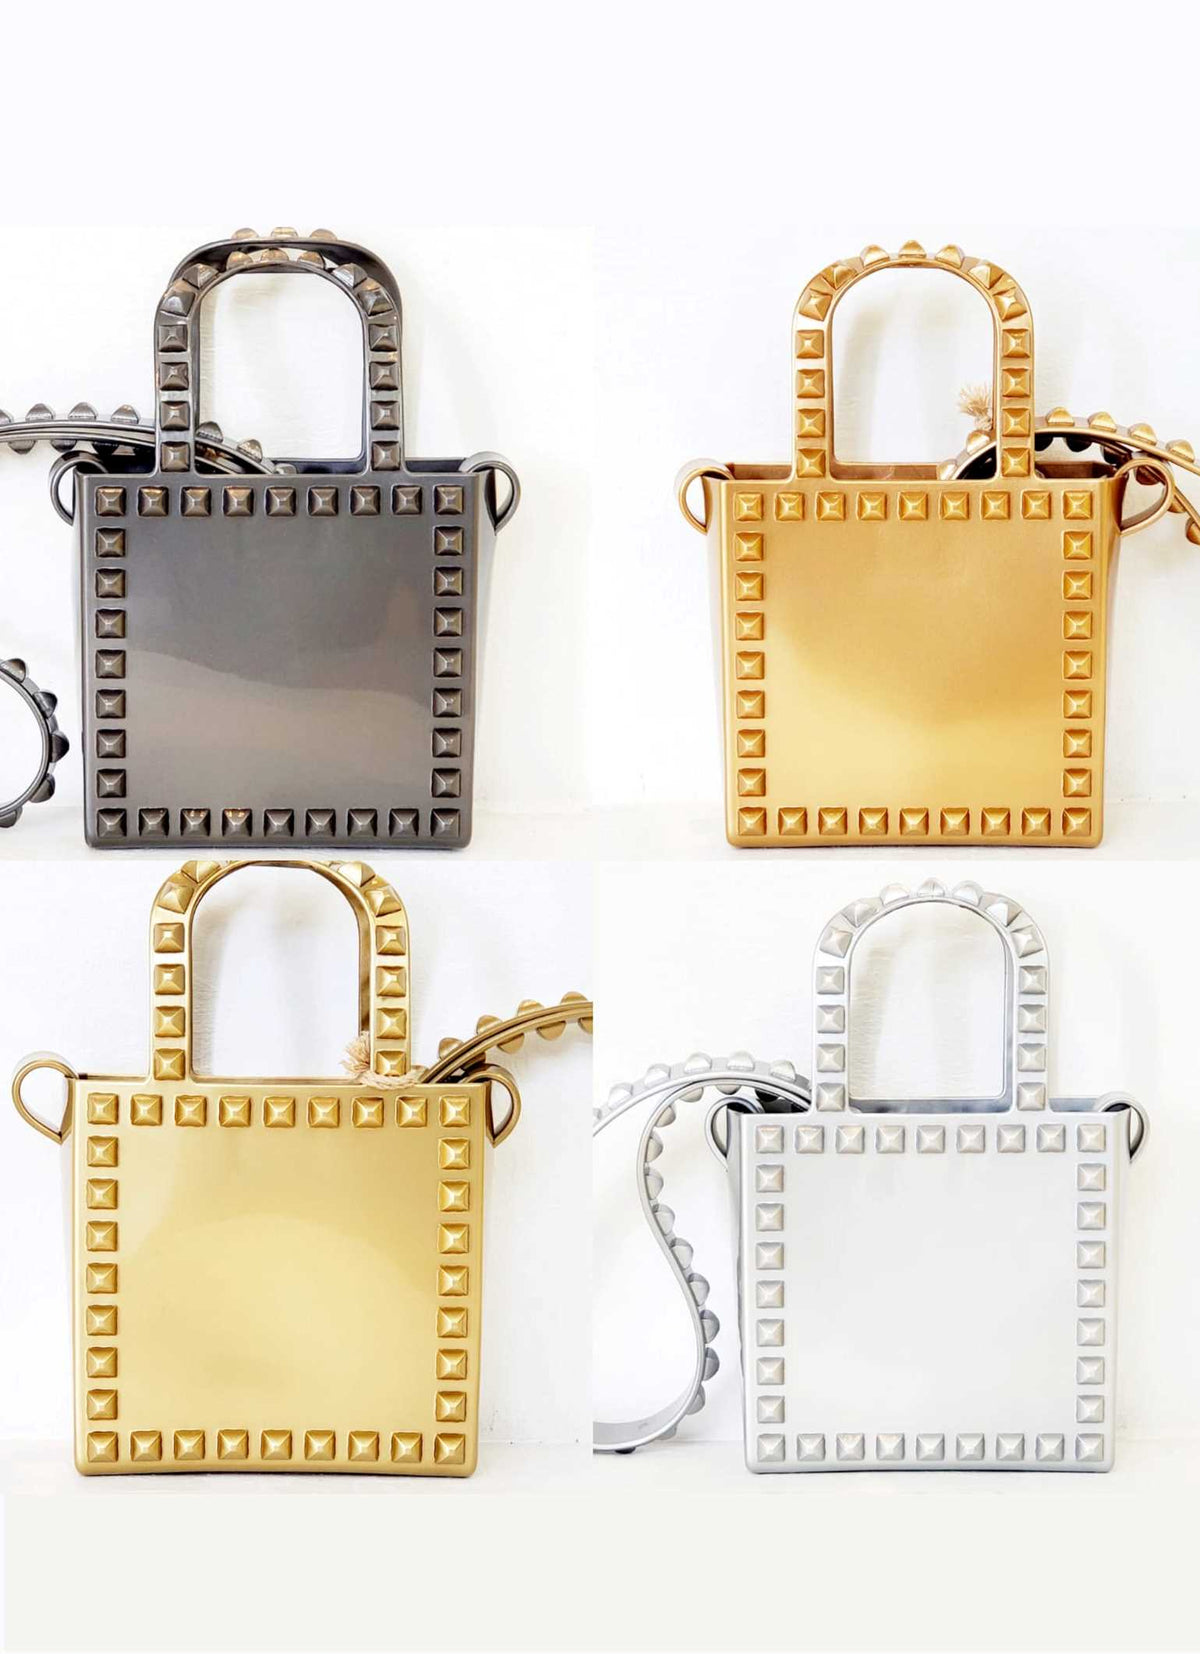 studded purse in metallic colors from Carmen Sol